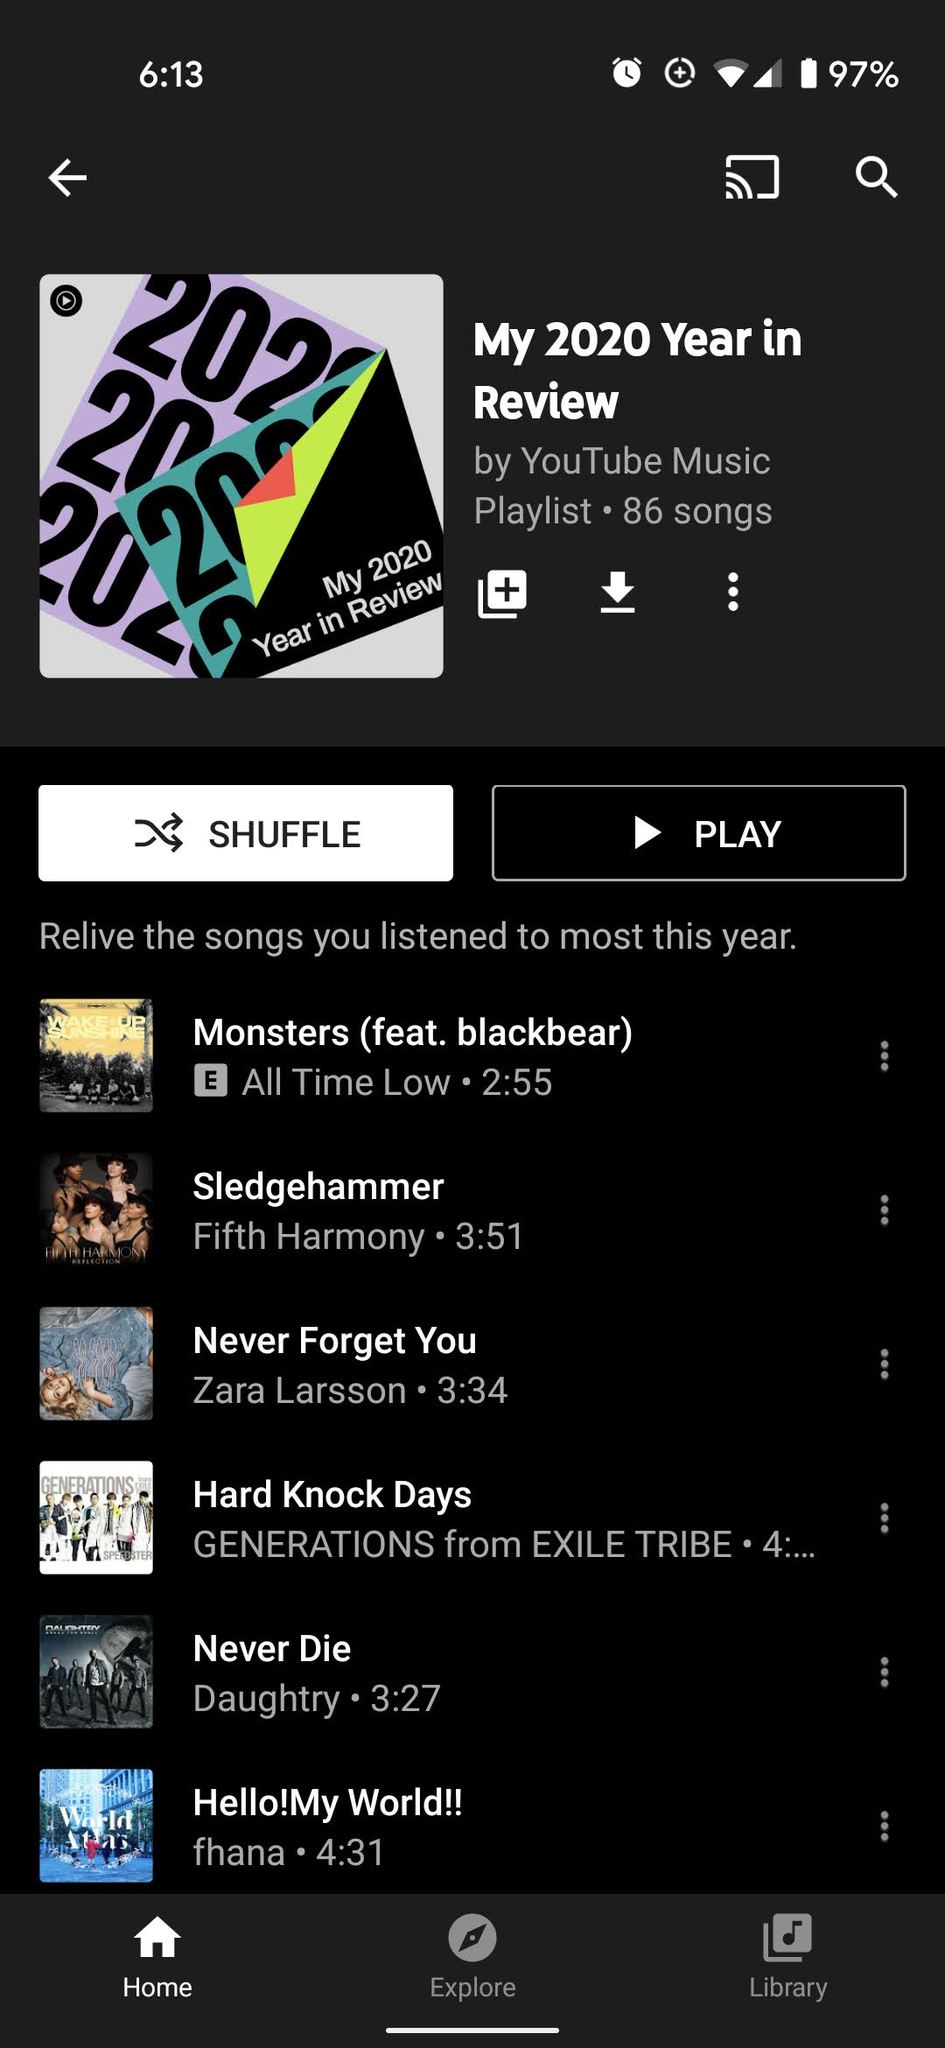 YouTube Music Year In Review 2020 Playlist for Ara